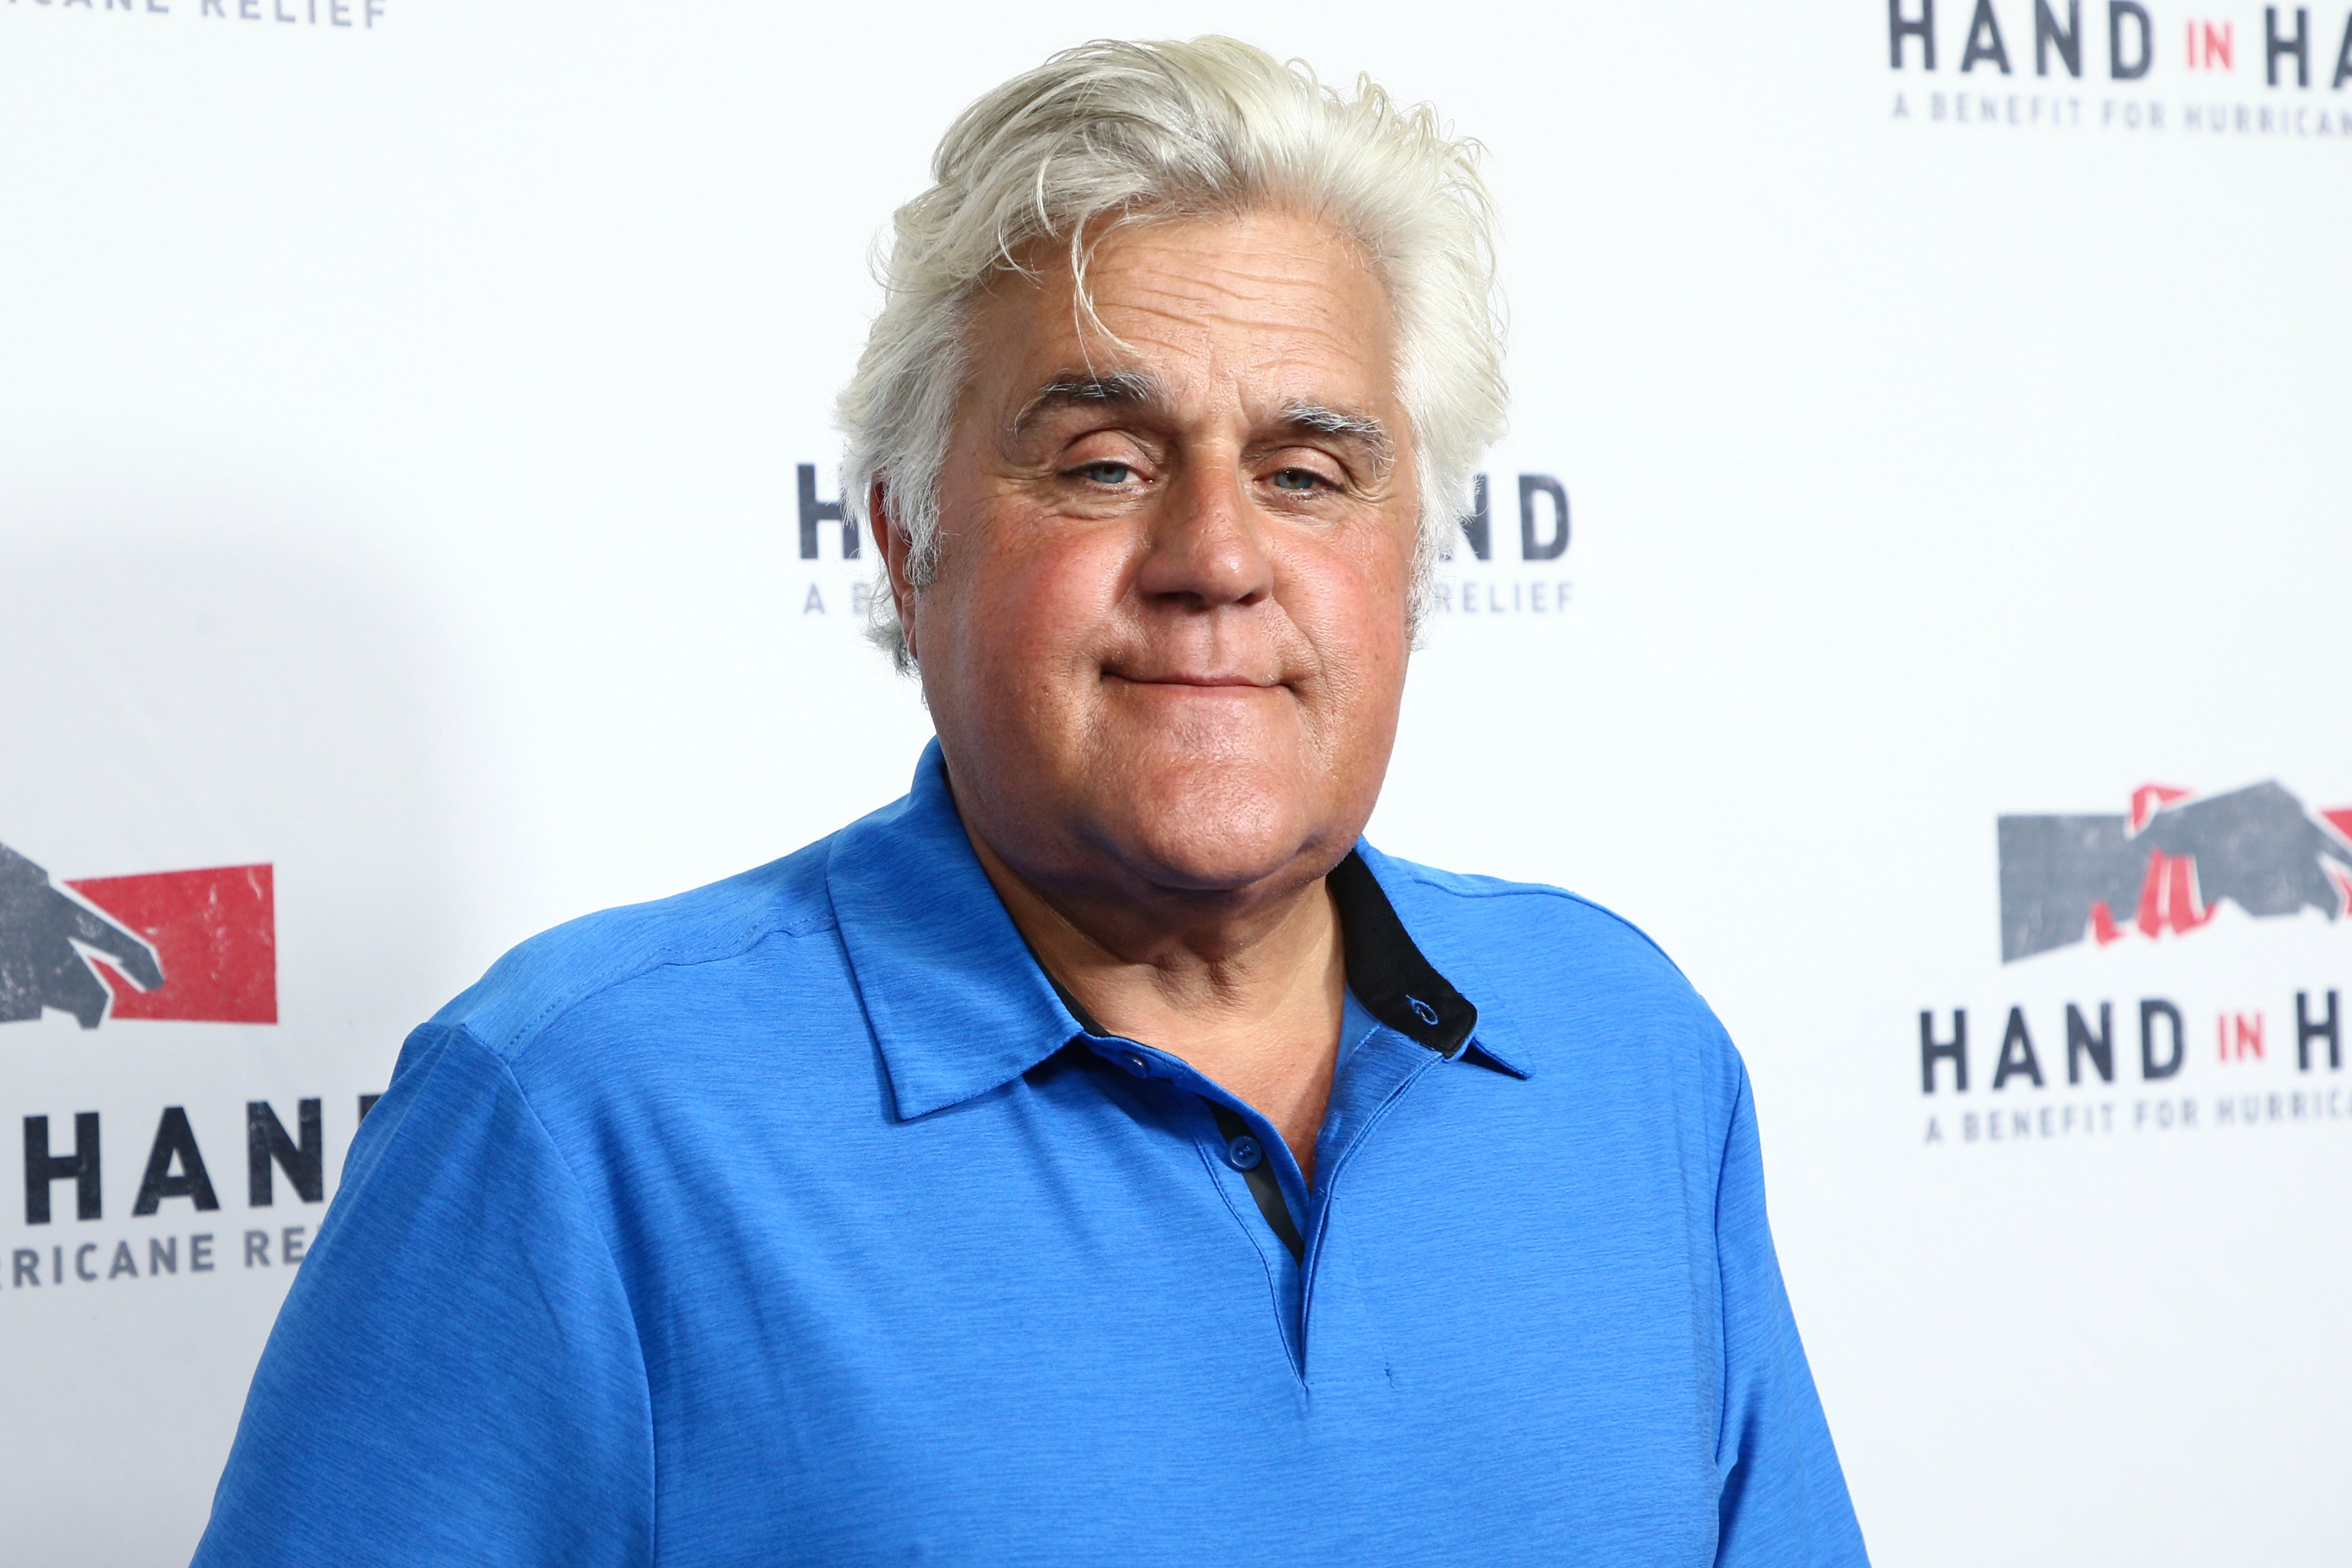 Leno was admitted to a specialist burns hospital, where he was given a skin graft